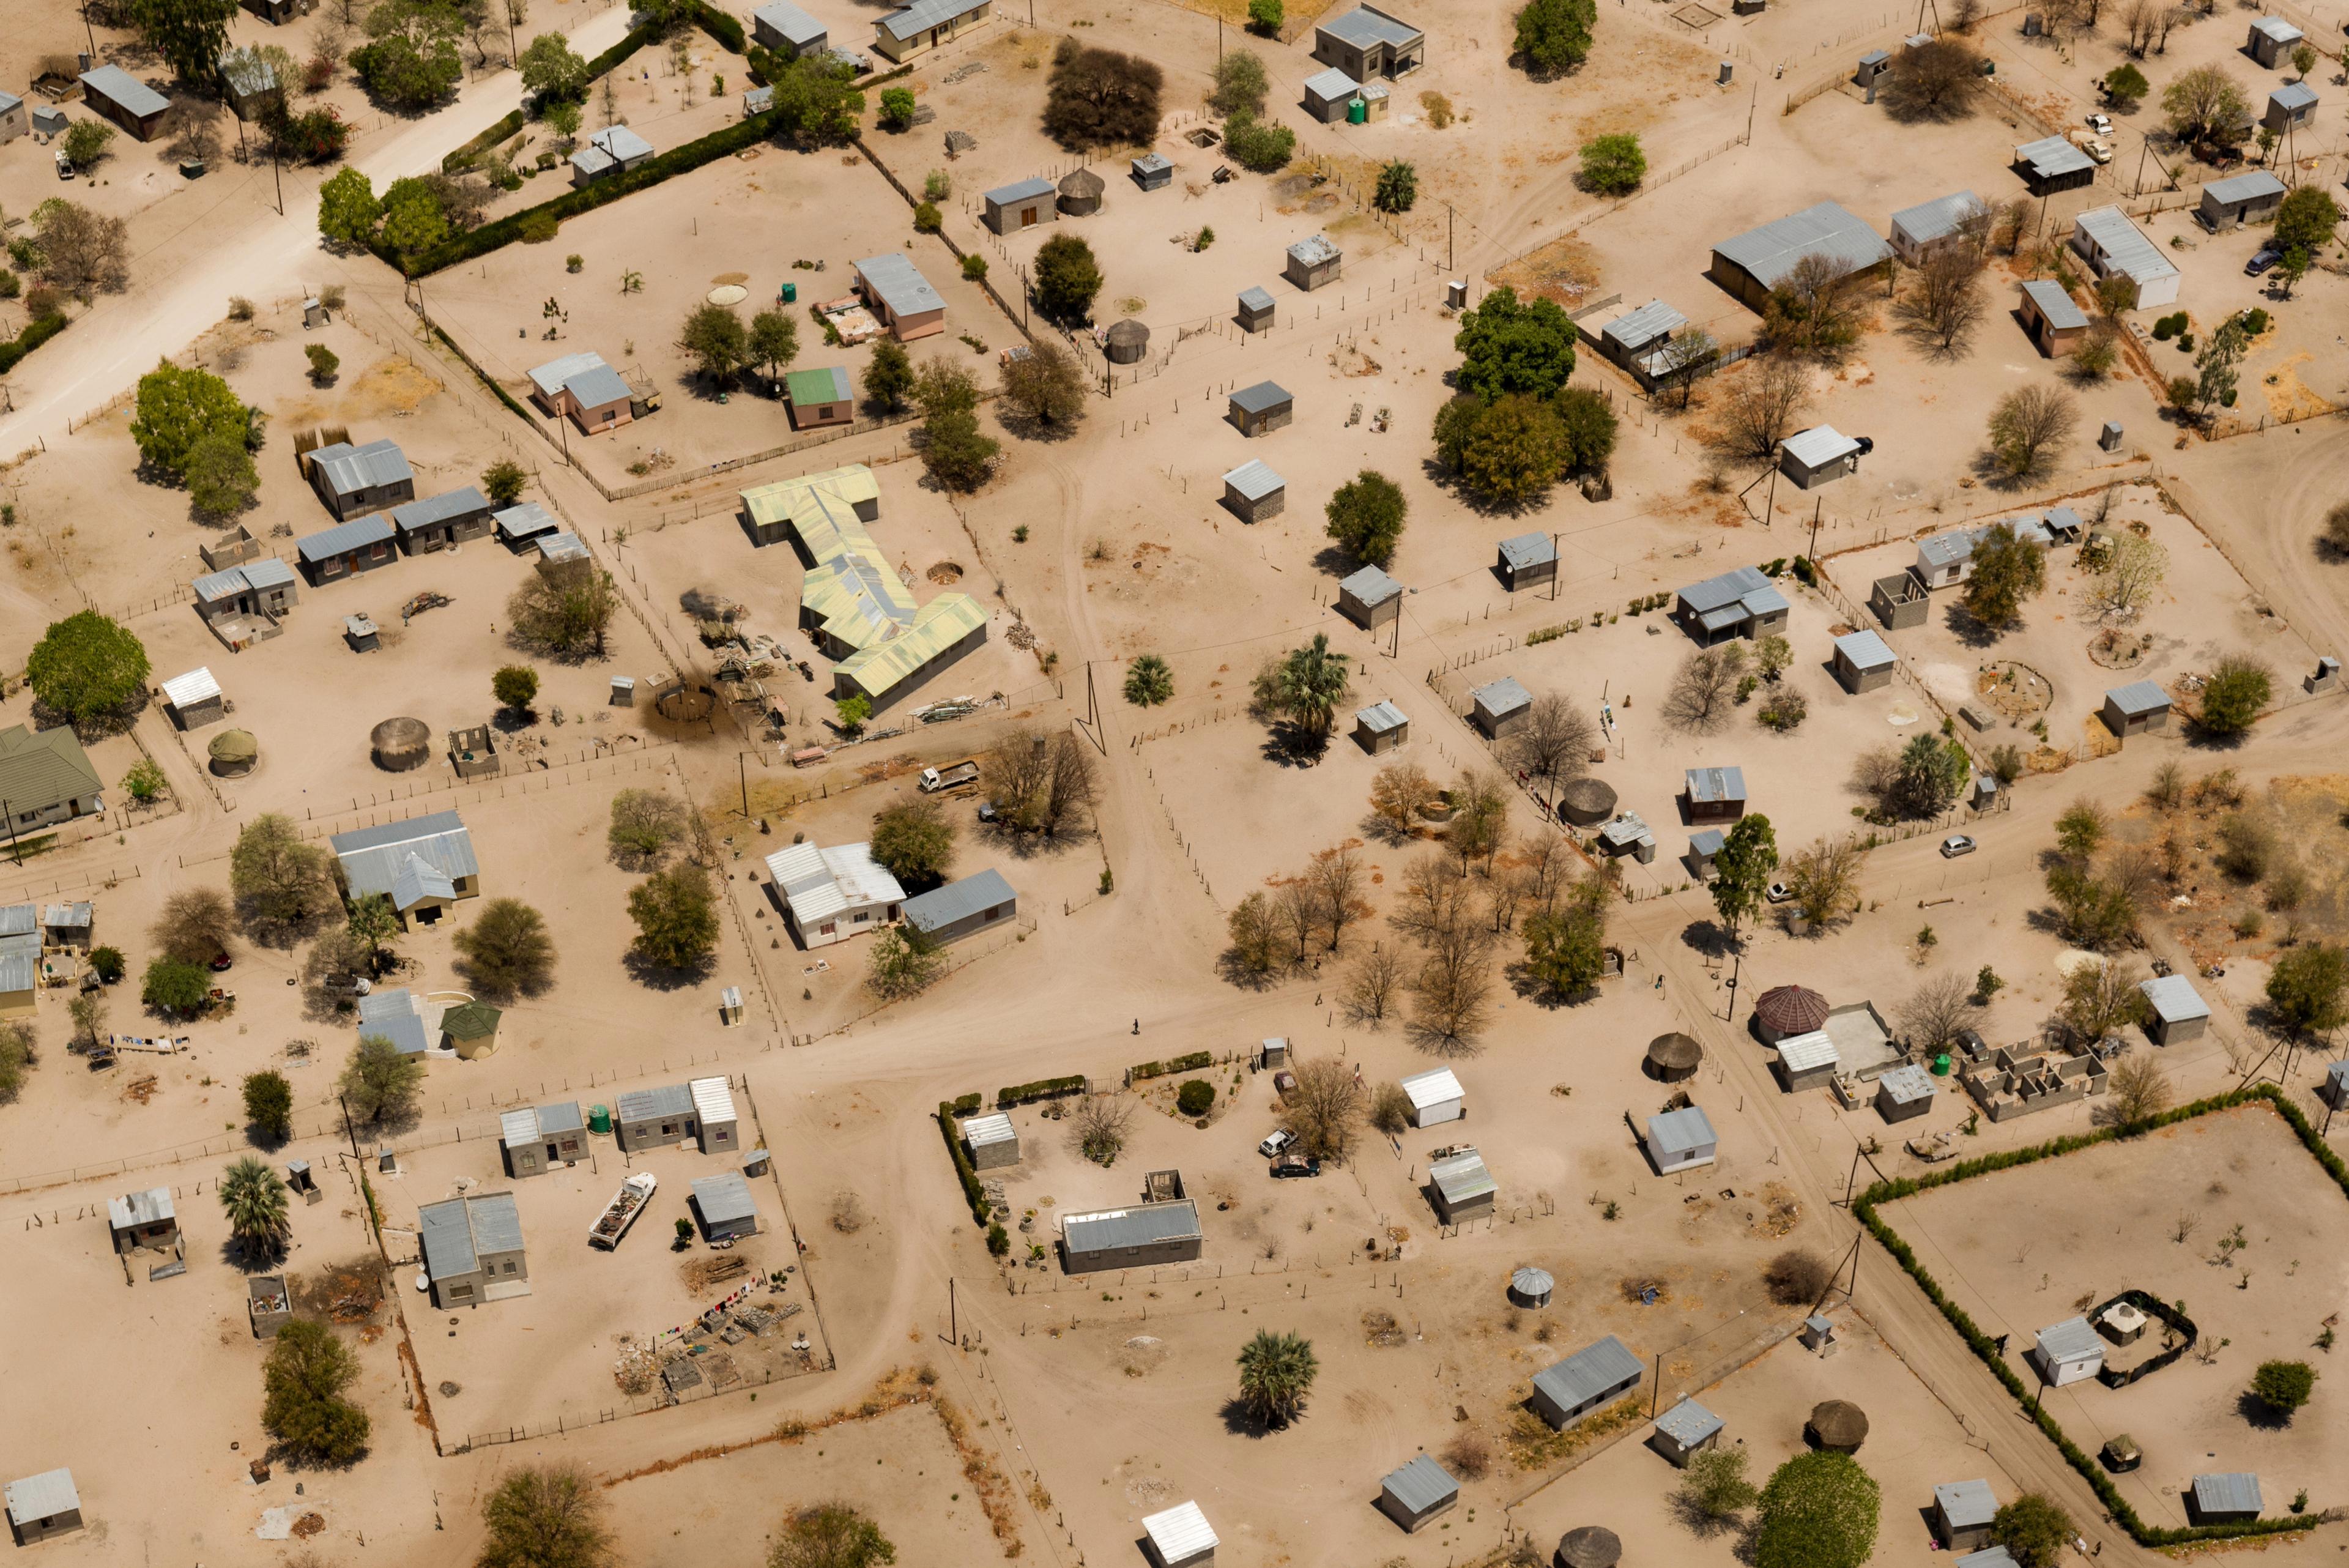 Overhead image of Botswana rural village landscape demonstrating the ability of drones to deliver vital medical supplies